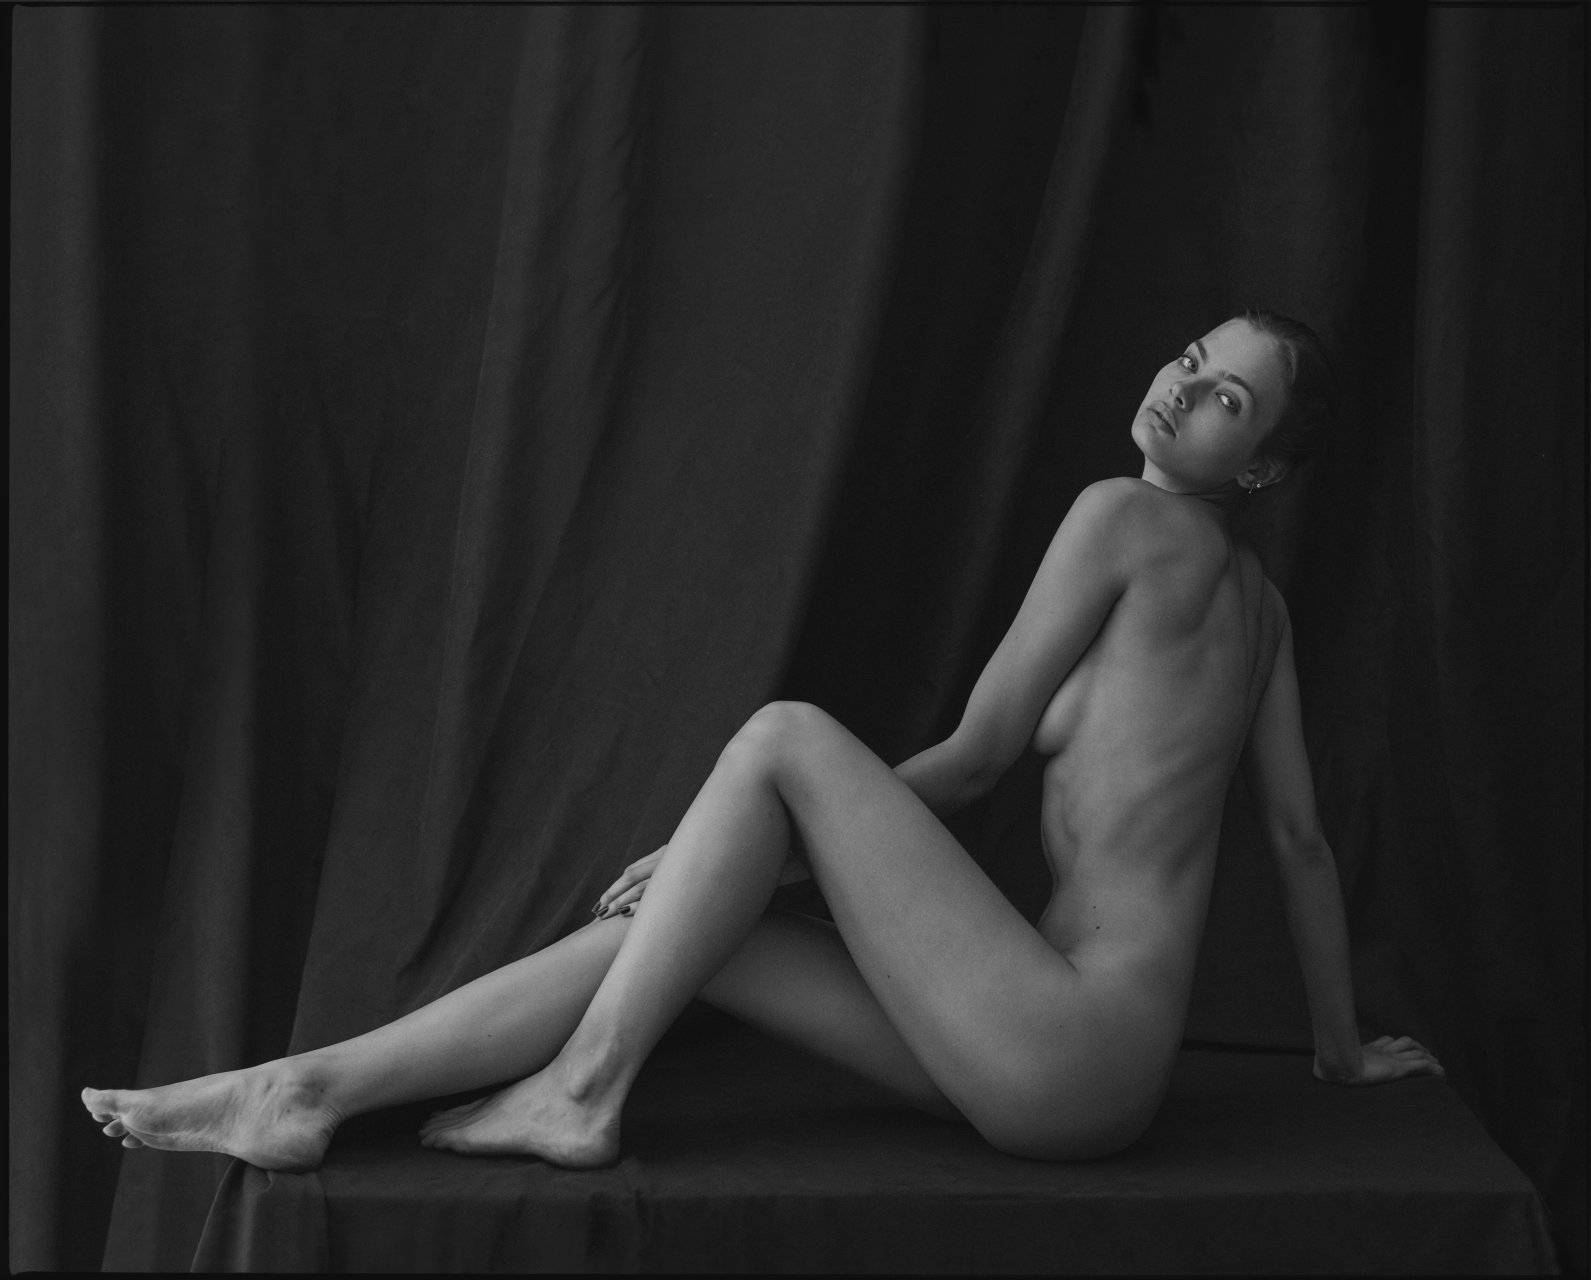 Here are the nude B&W photos of Moa Aberg photographed by Scott MacDono...